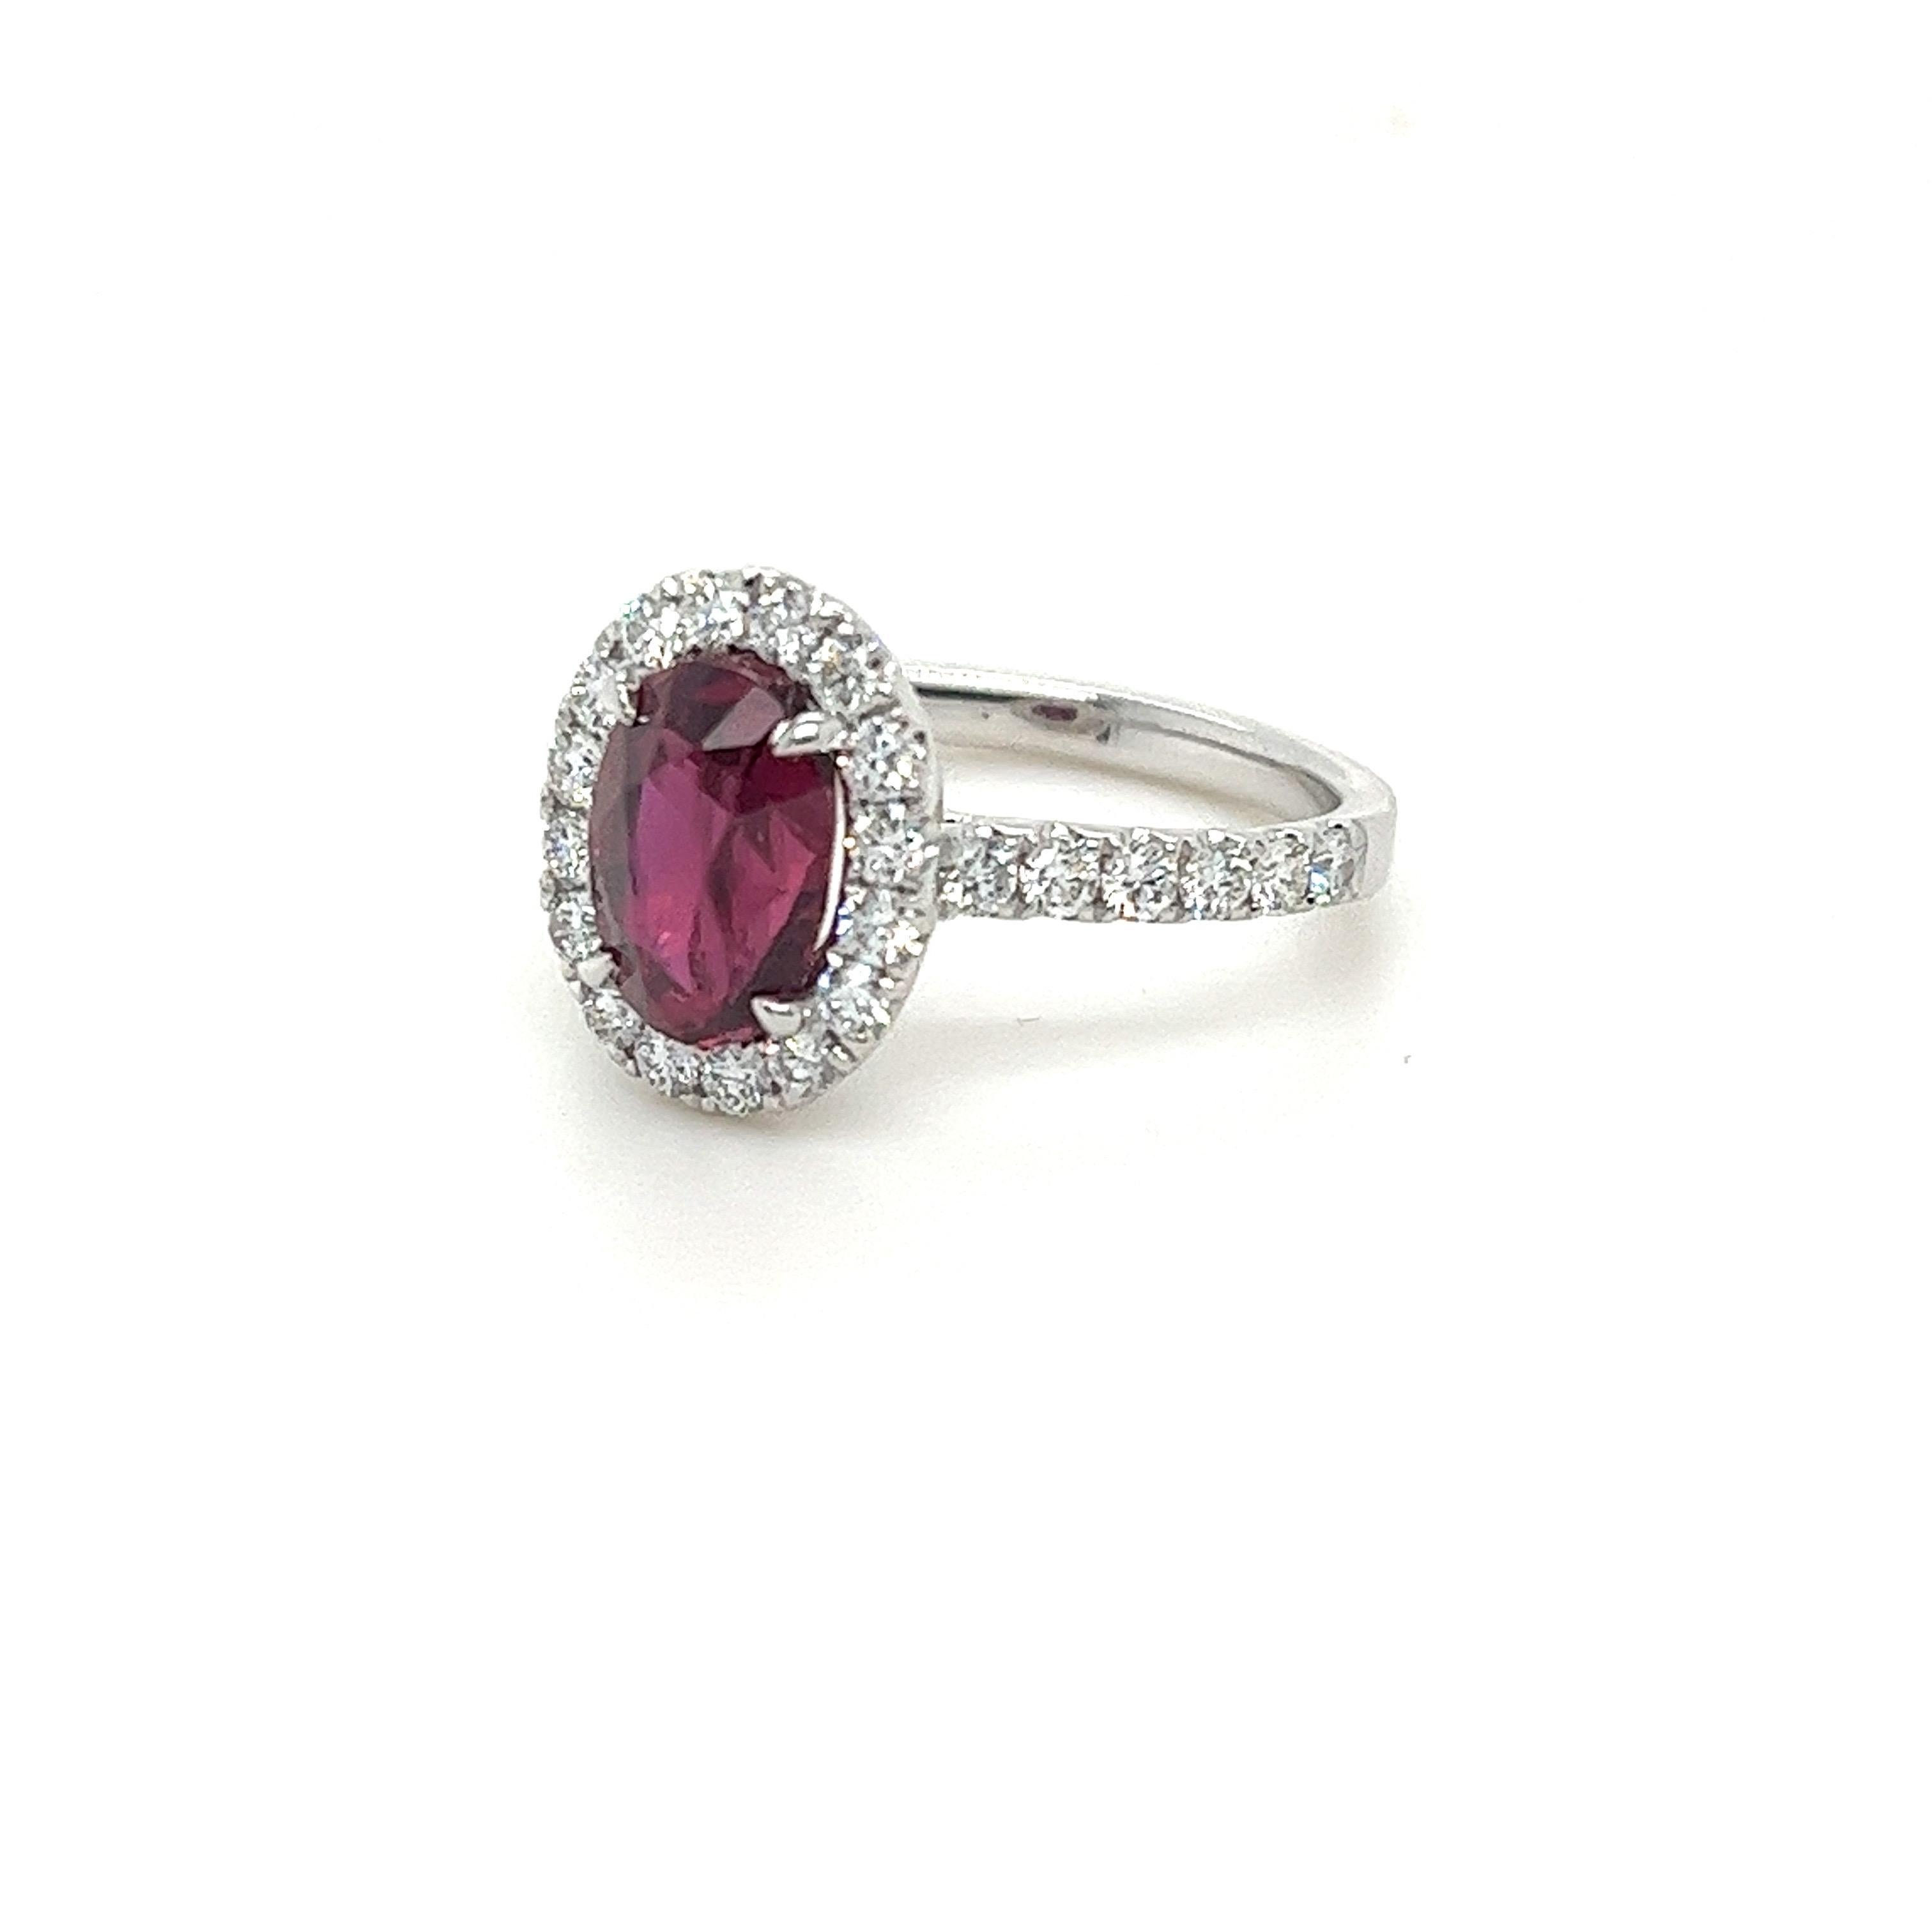 GIA certified Oval Ruby weighing 2.96 carats
Measuring ( 9.29x6.56x5.67) mm
Diamonds weighing .75 carats
G-SI1
Set in 18k white gold ring
3.66 g